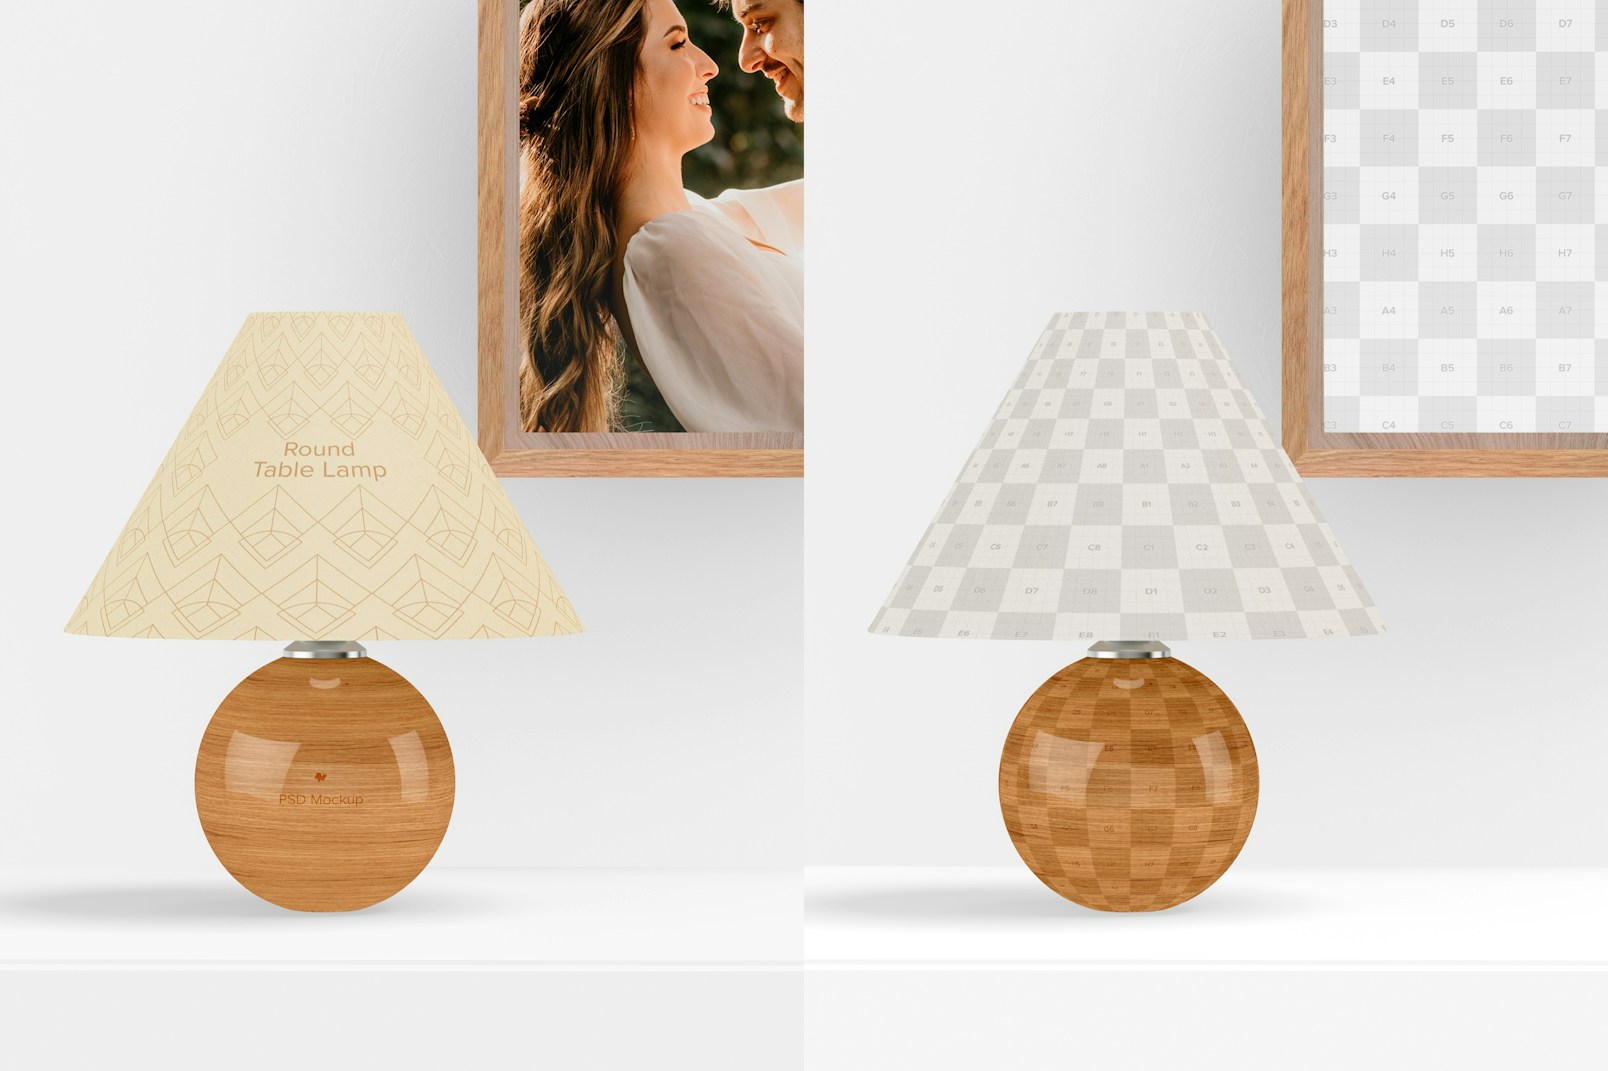 Round Table Lamp with Frame Mockup